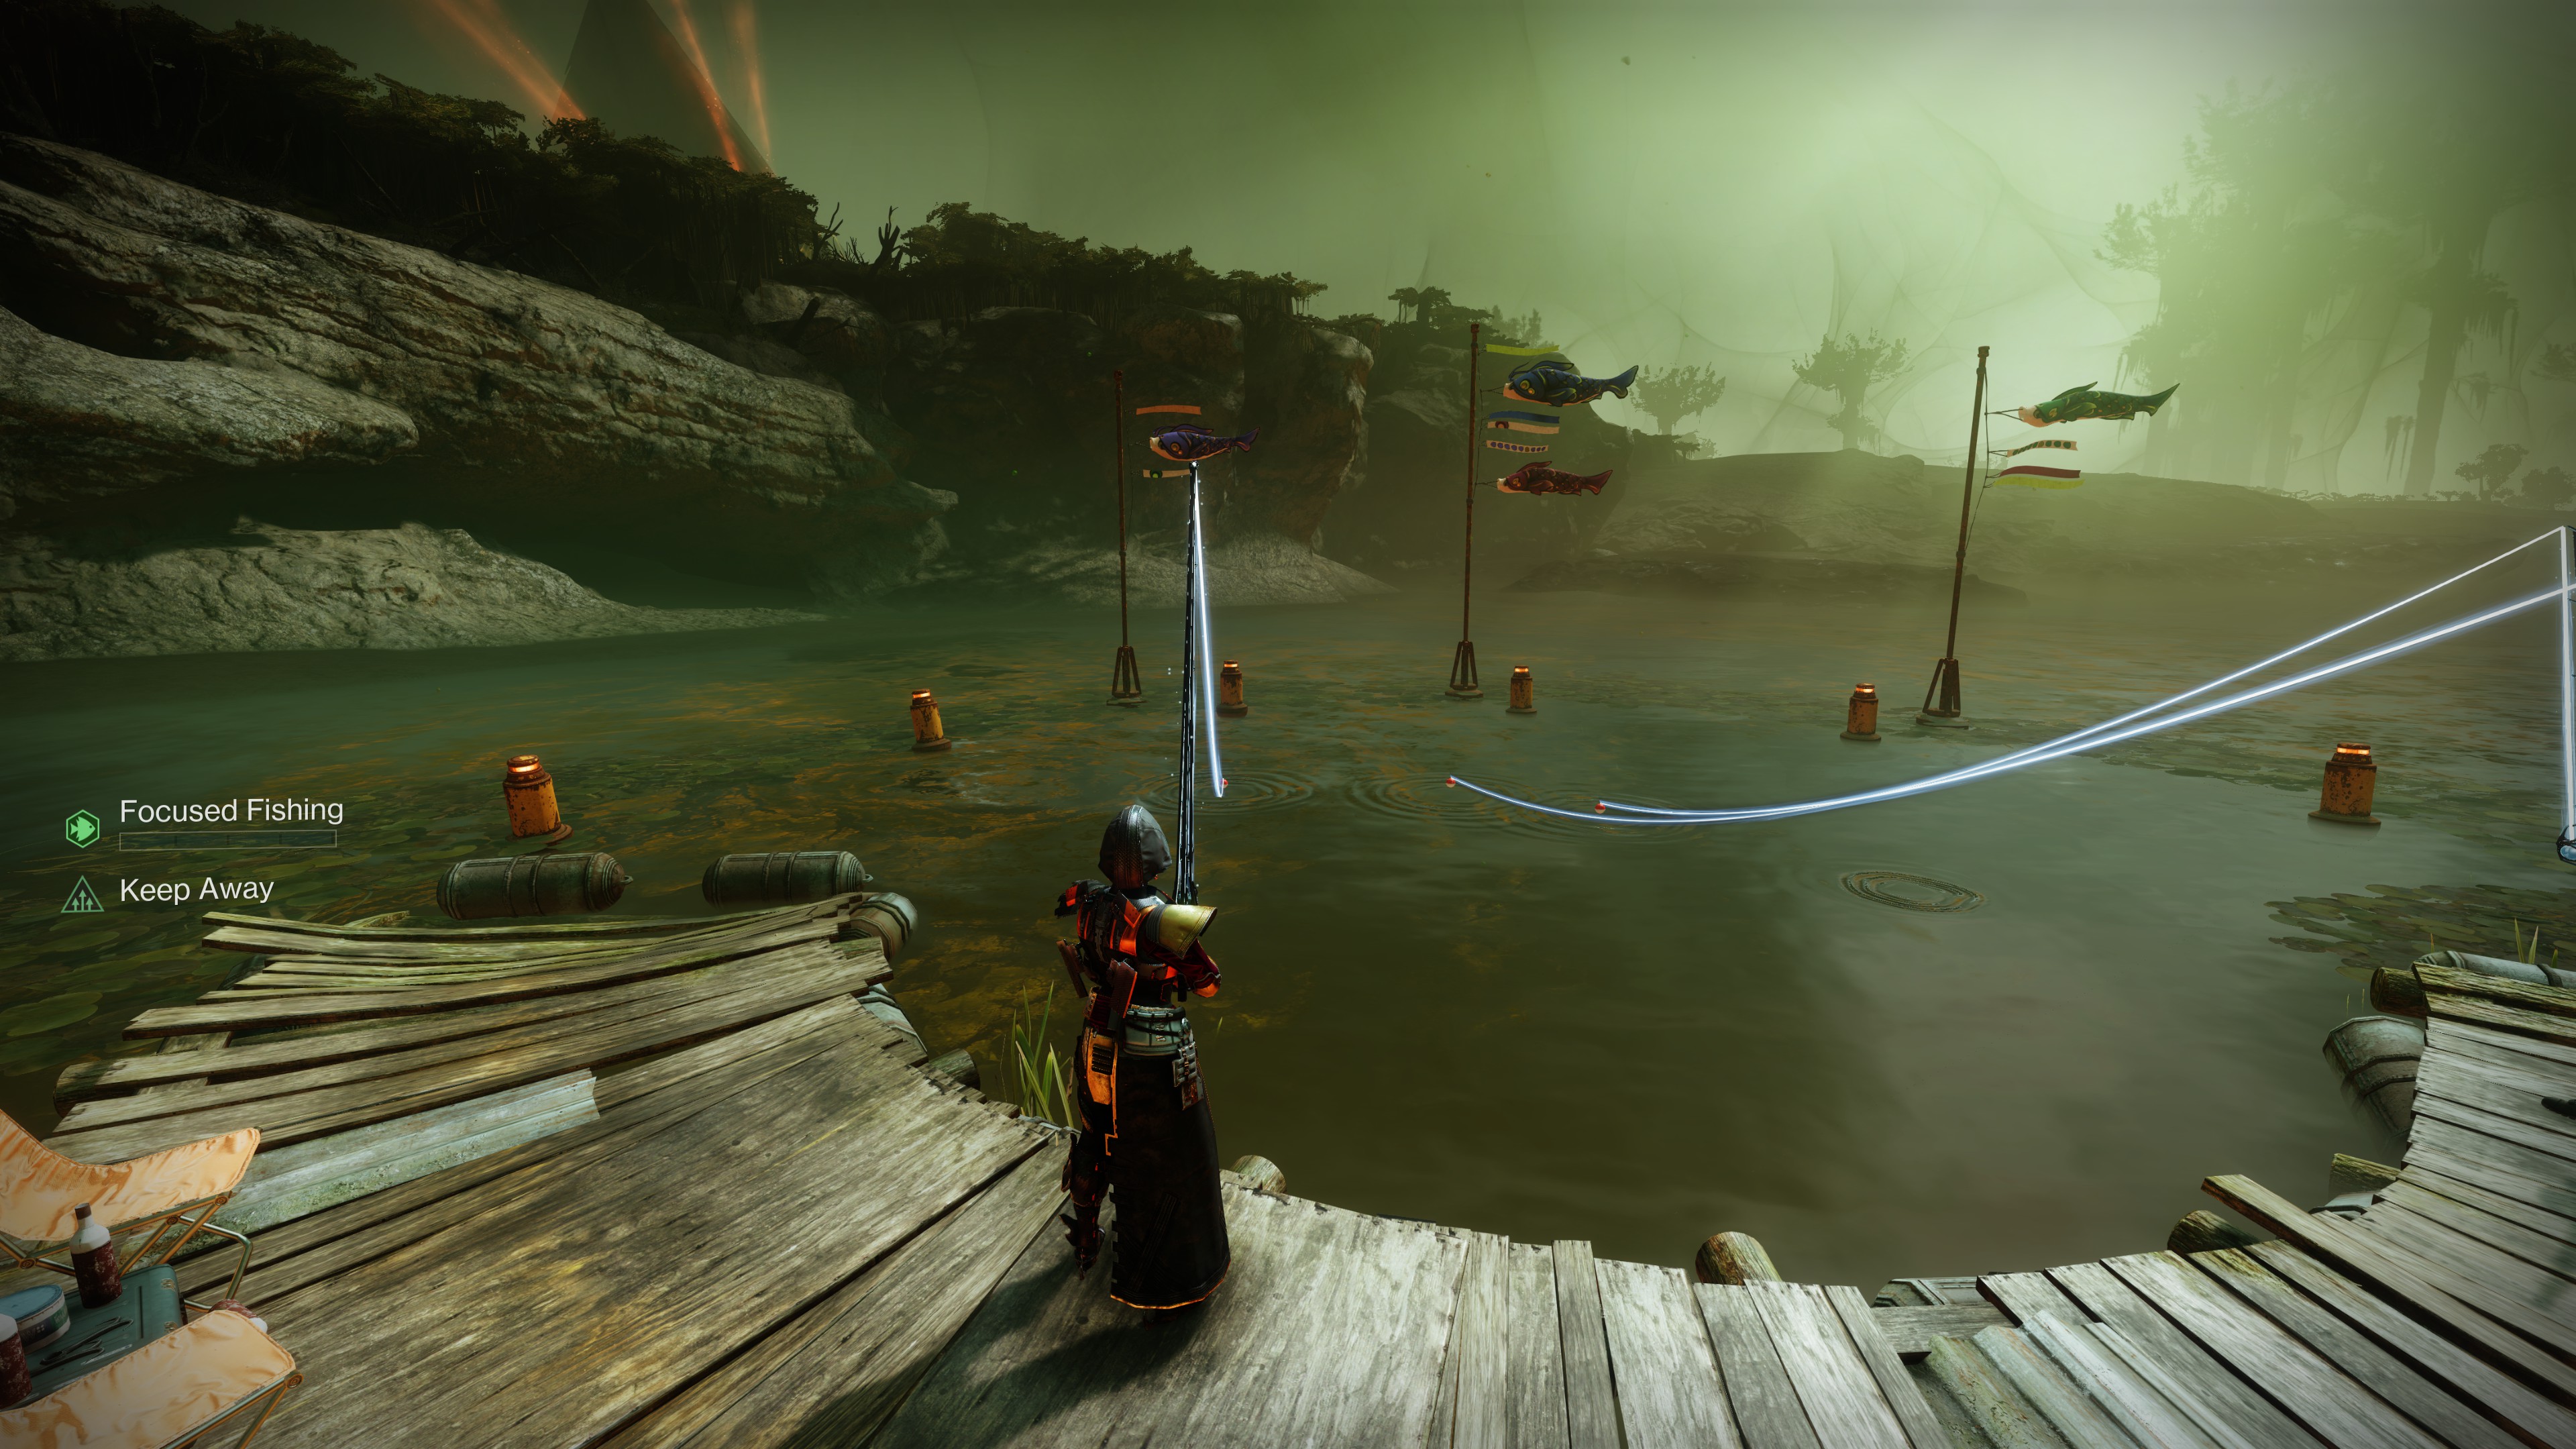 Destiny 2 now has one of the best fishing minigames in an RPG